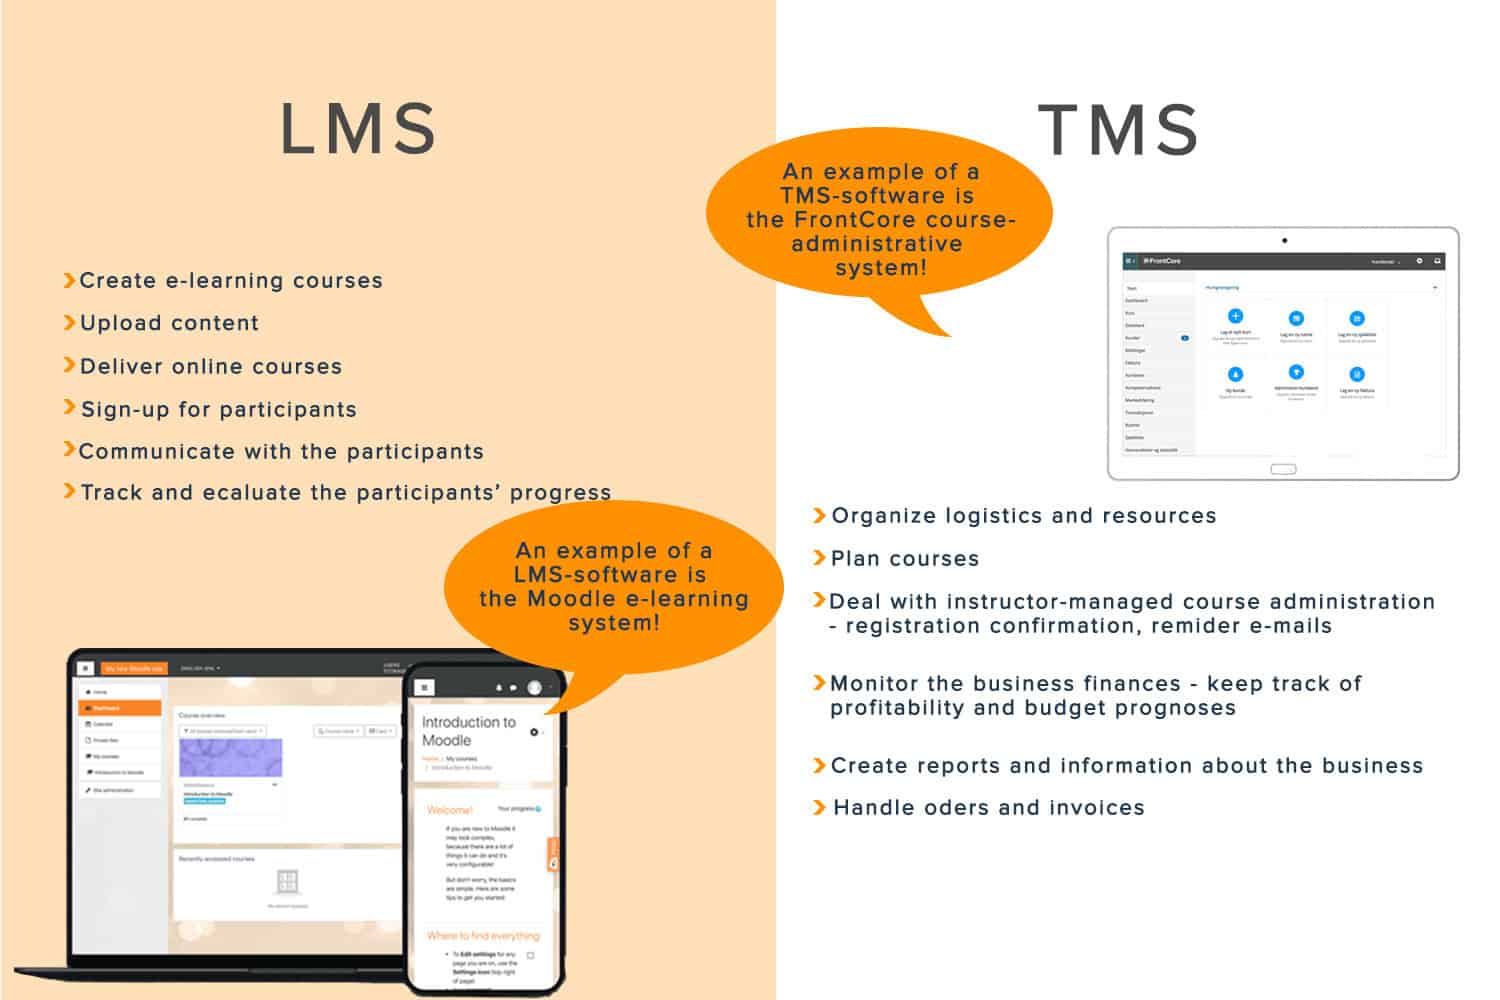 LMS_and_TMS_difference